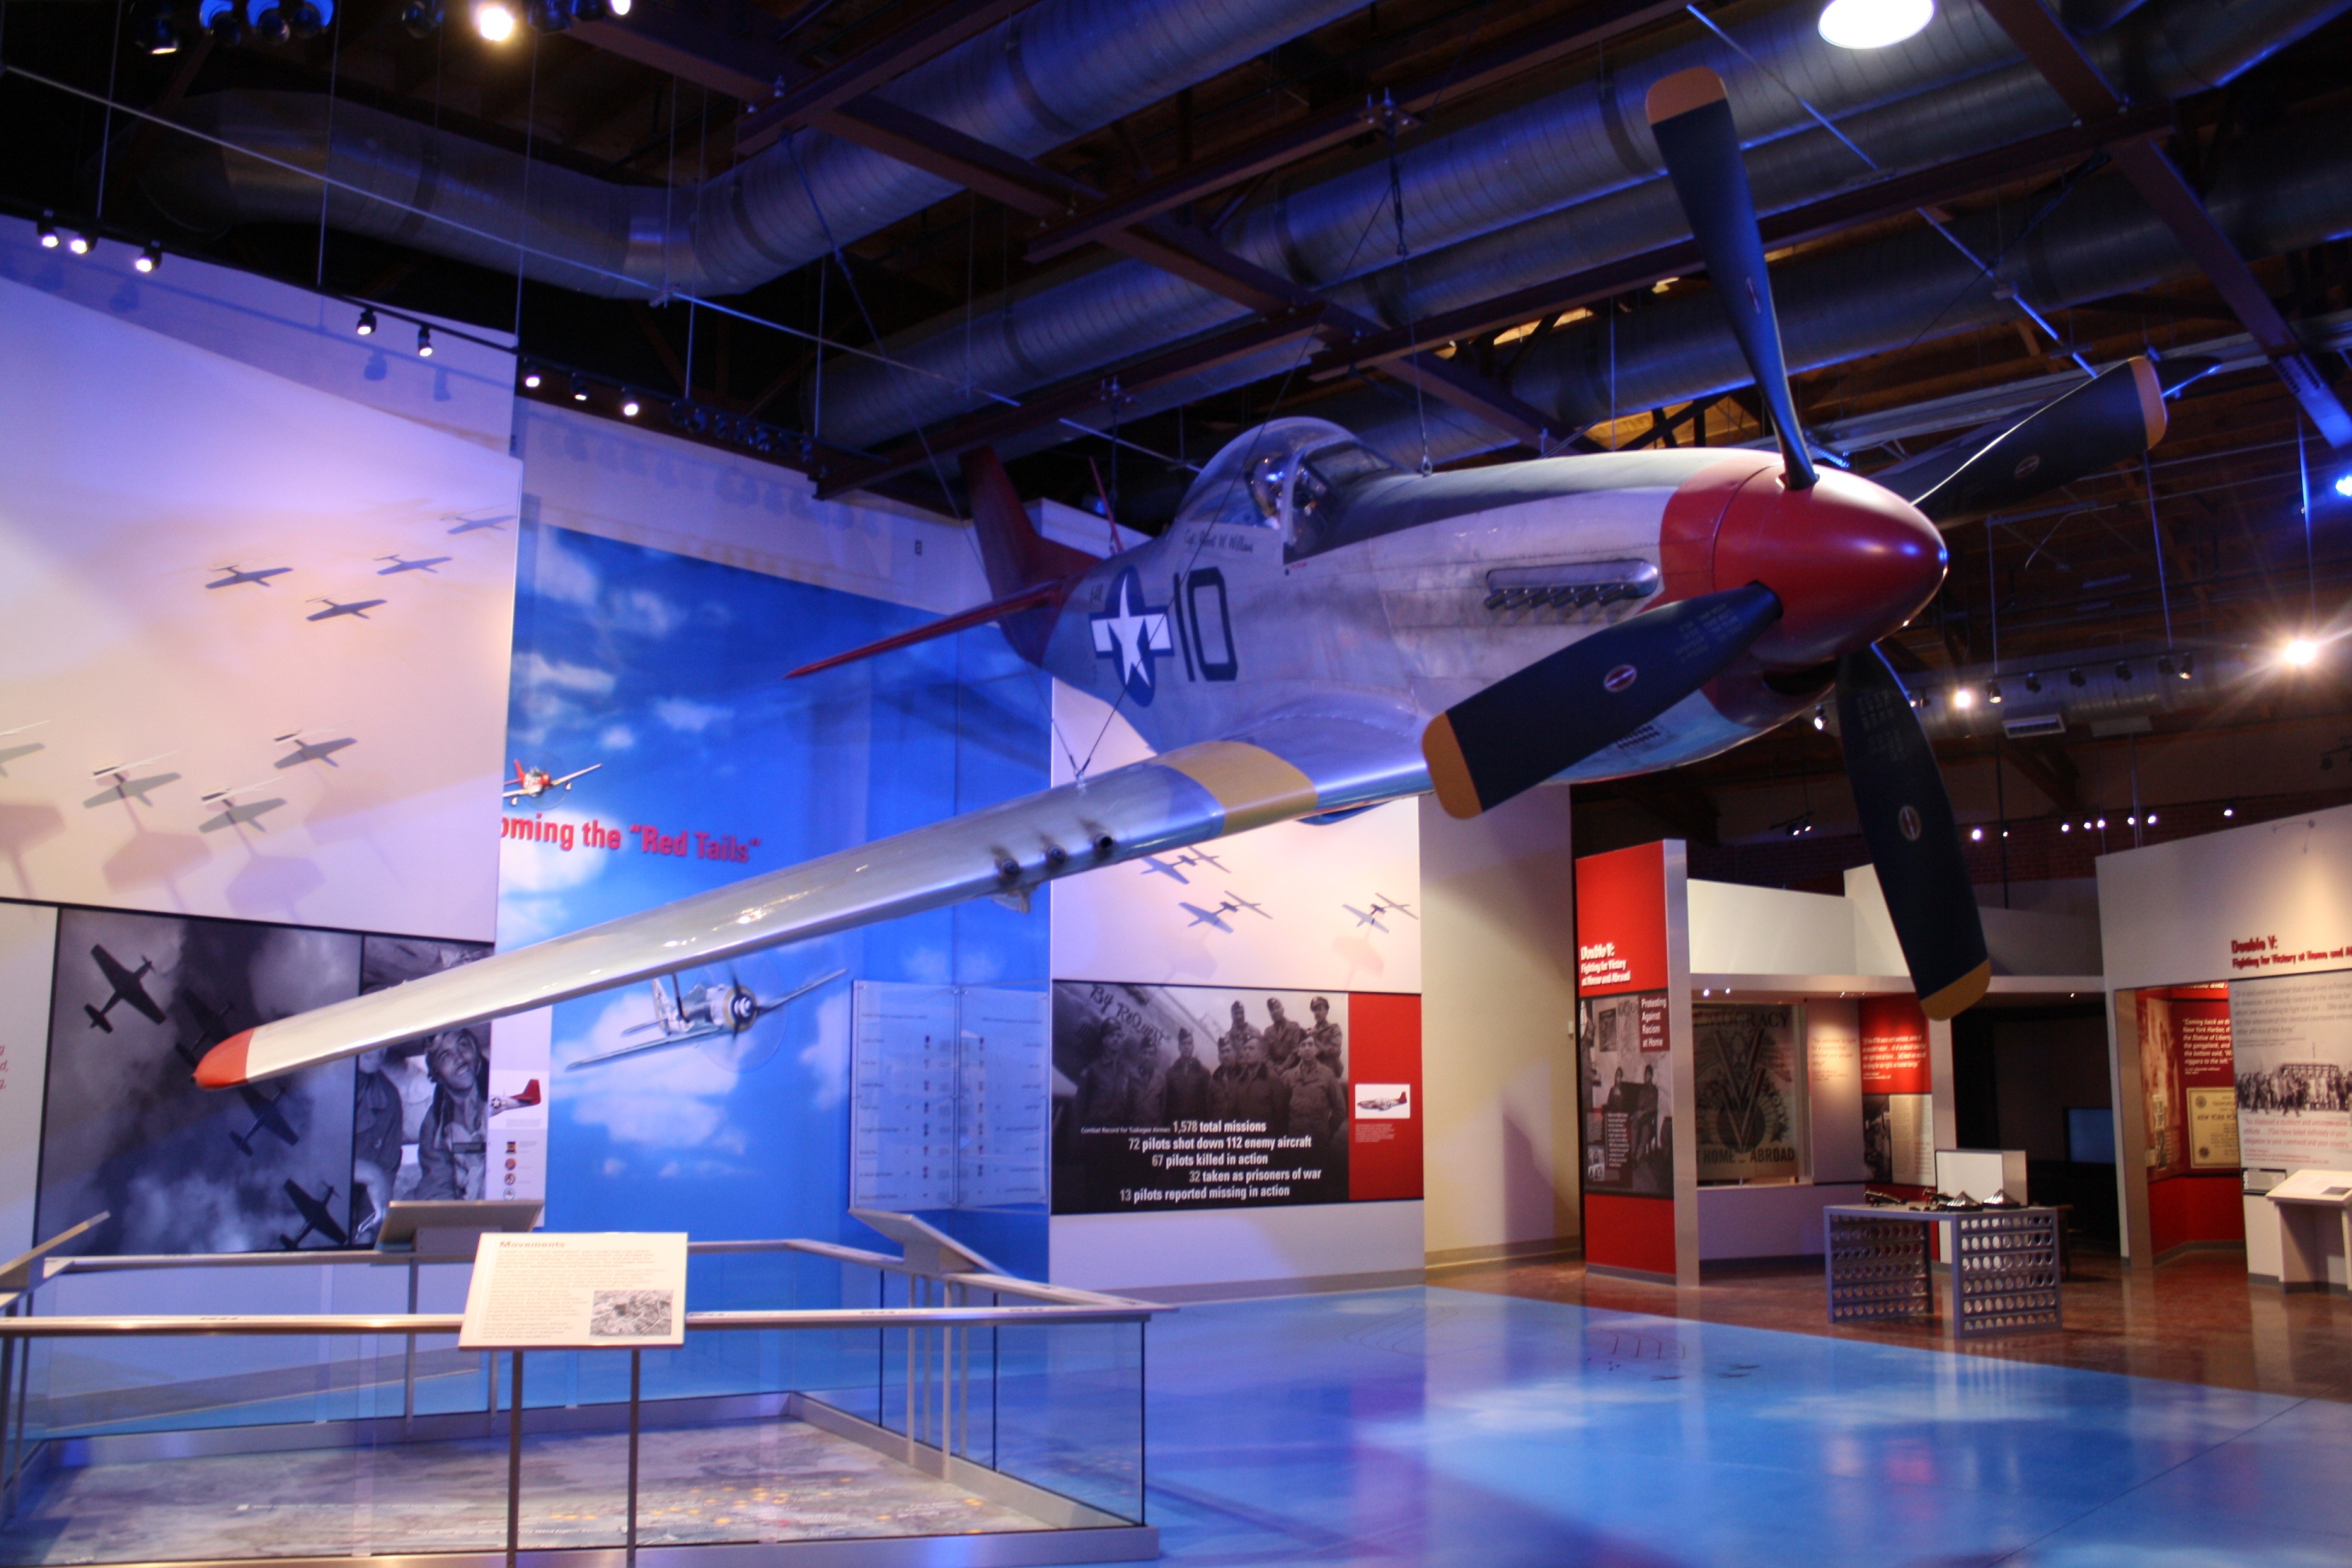 Red-Tail P-51D Mustang In Flight Exhibit